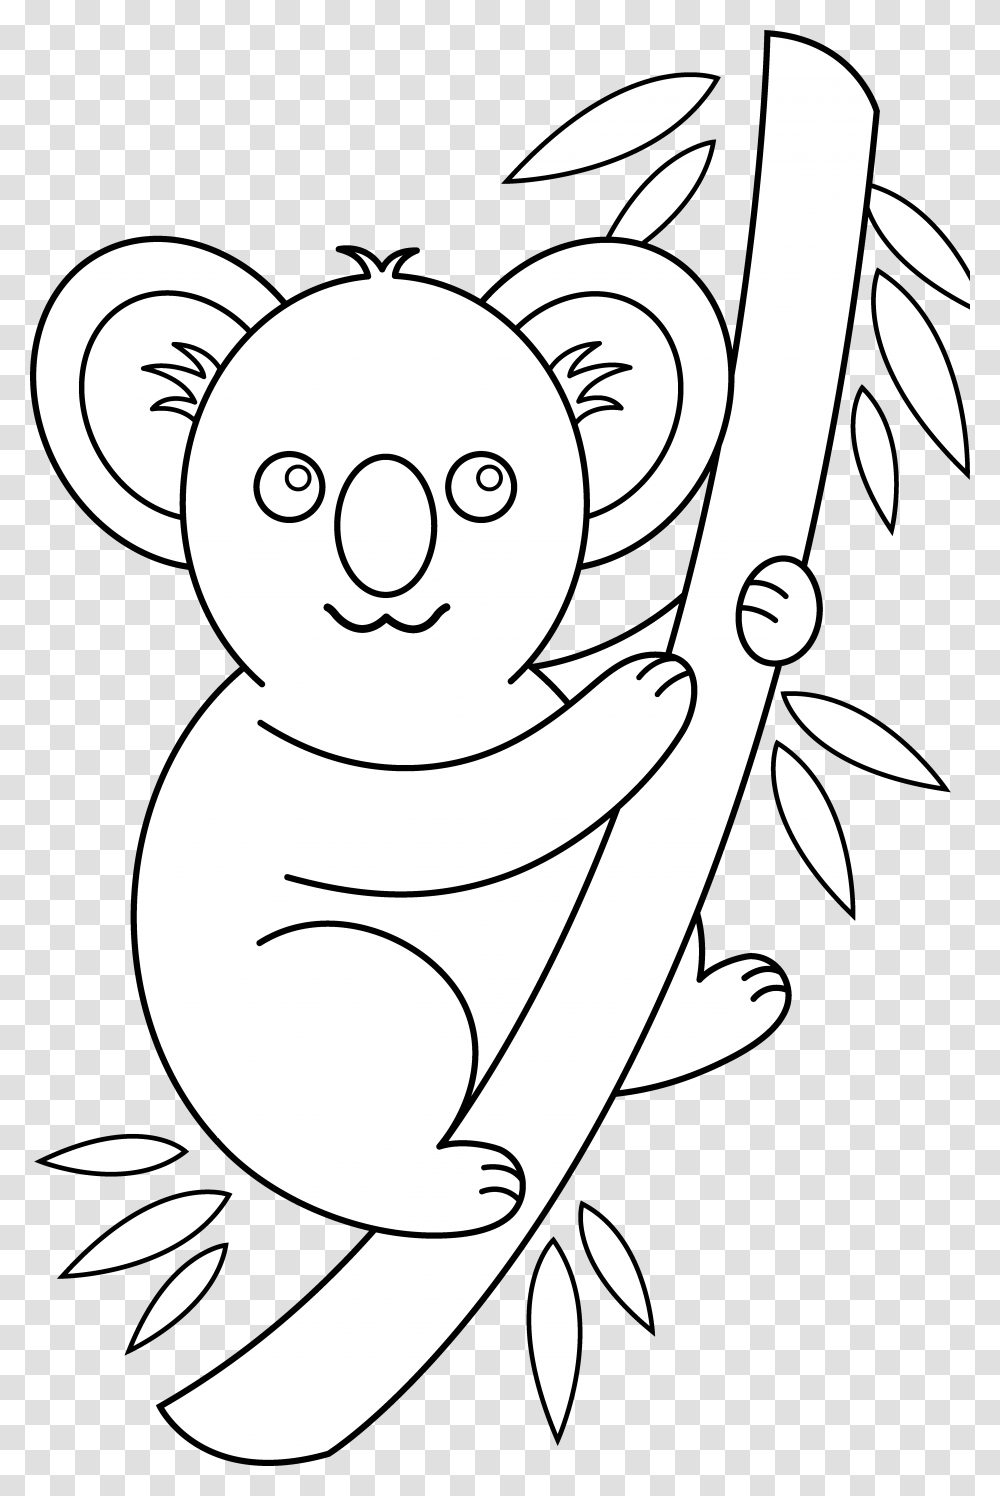 Cartoon Koala Colouring Pages Koala Clipart Black And White, Face, Toy, Drawing, Smile Transparent Png